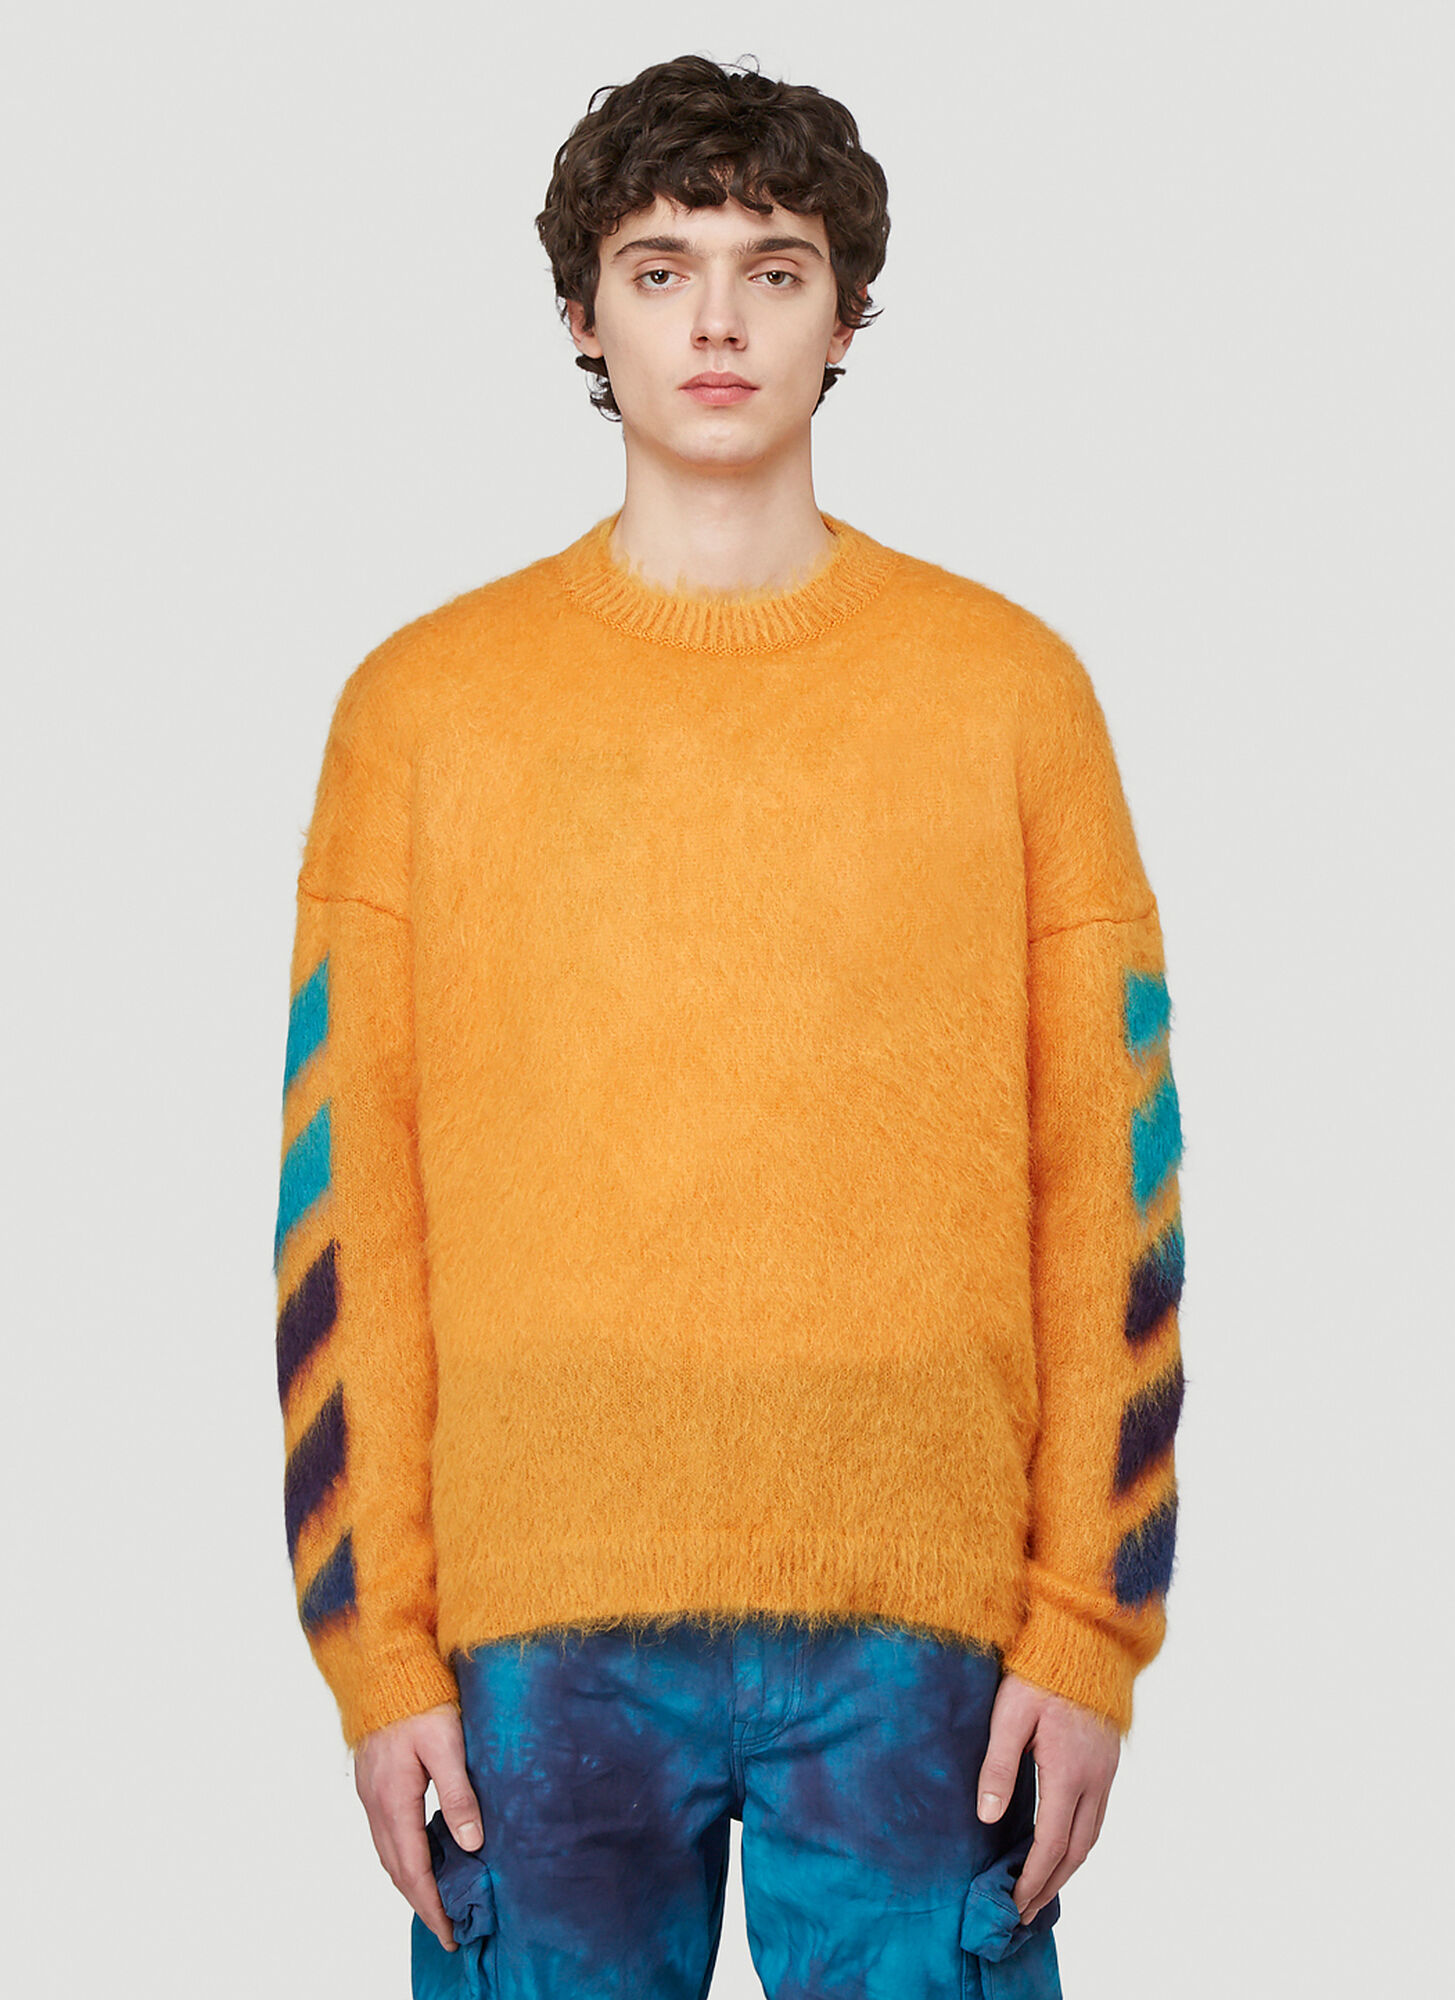 Off-White Textured Knit Sweater in Orange size S | The Fashionisto